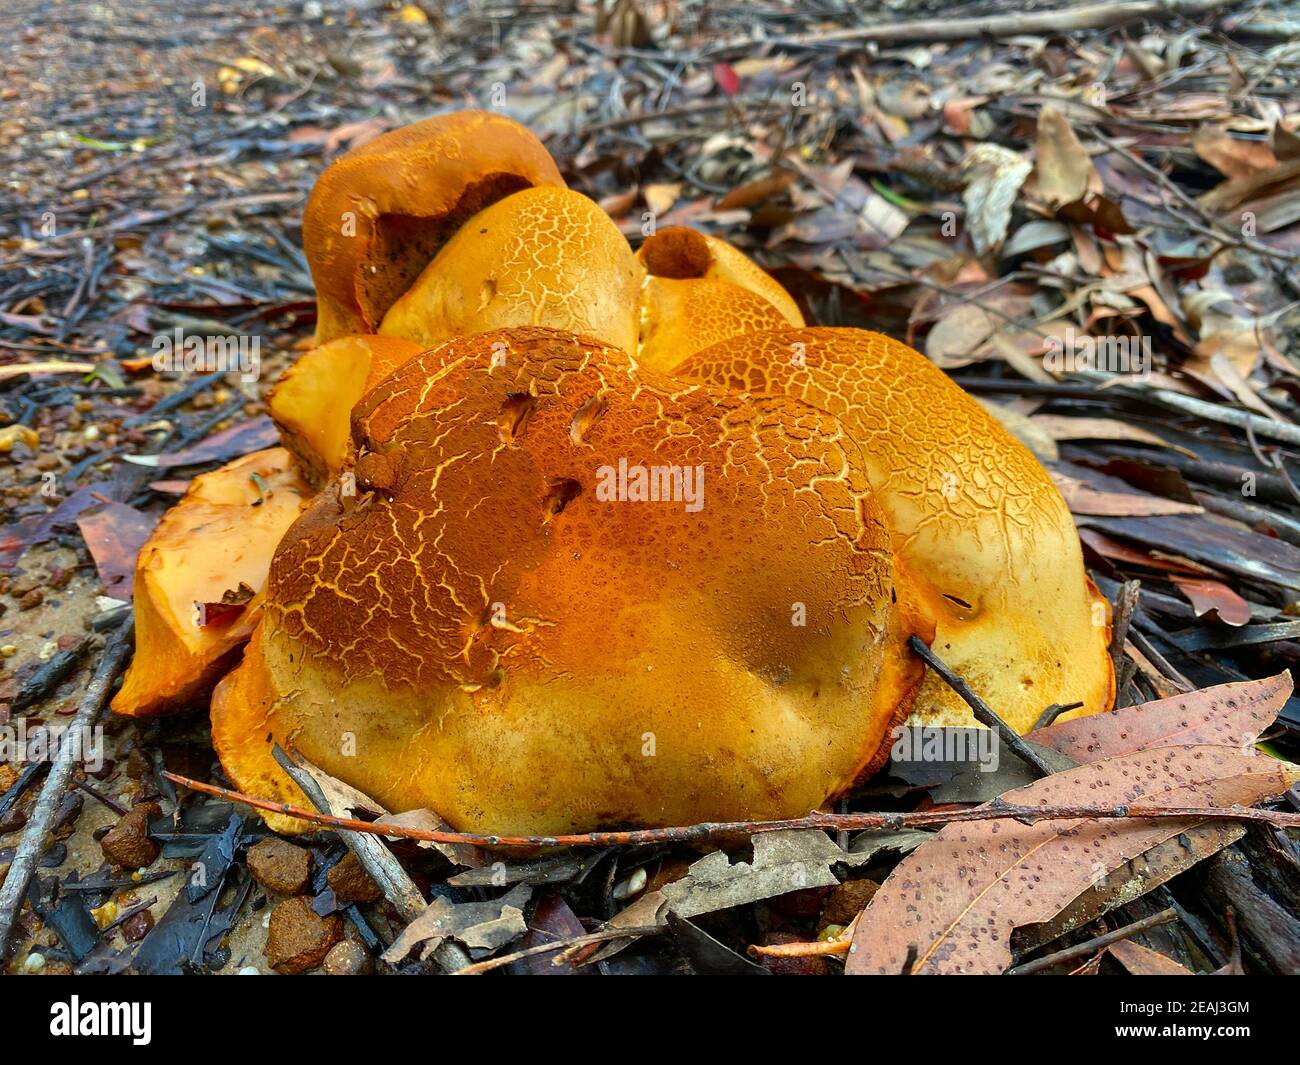 A large, unidentified cluster of orange mushrooms Stock Photo